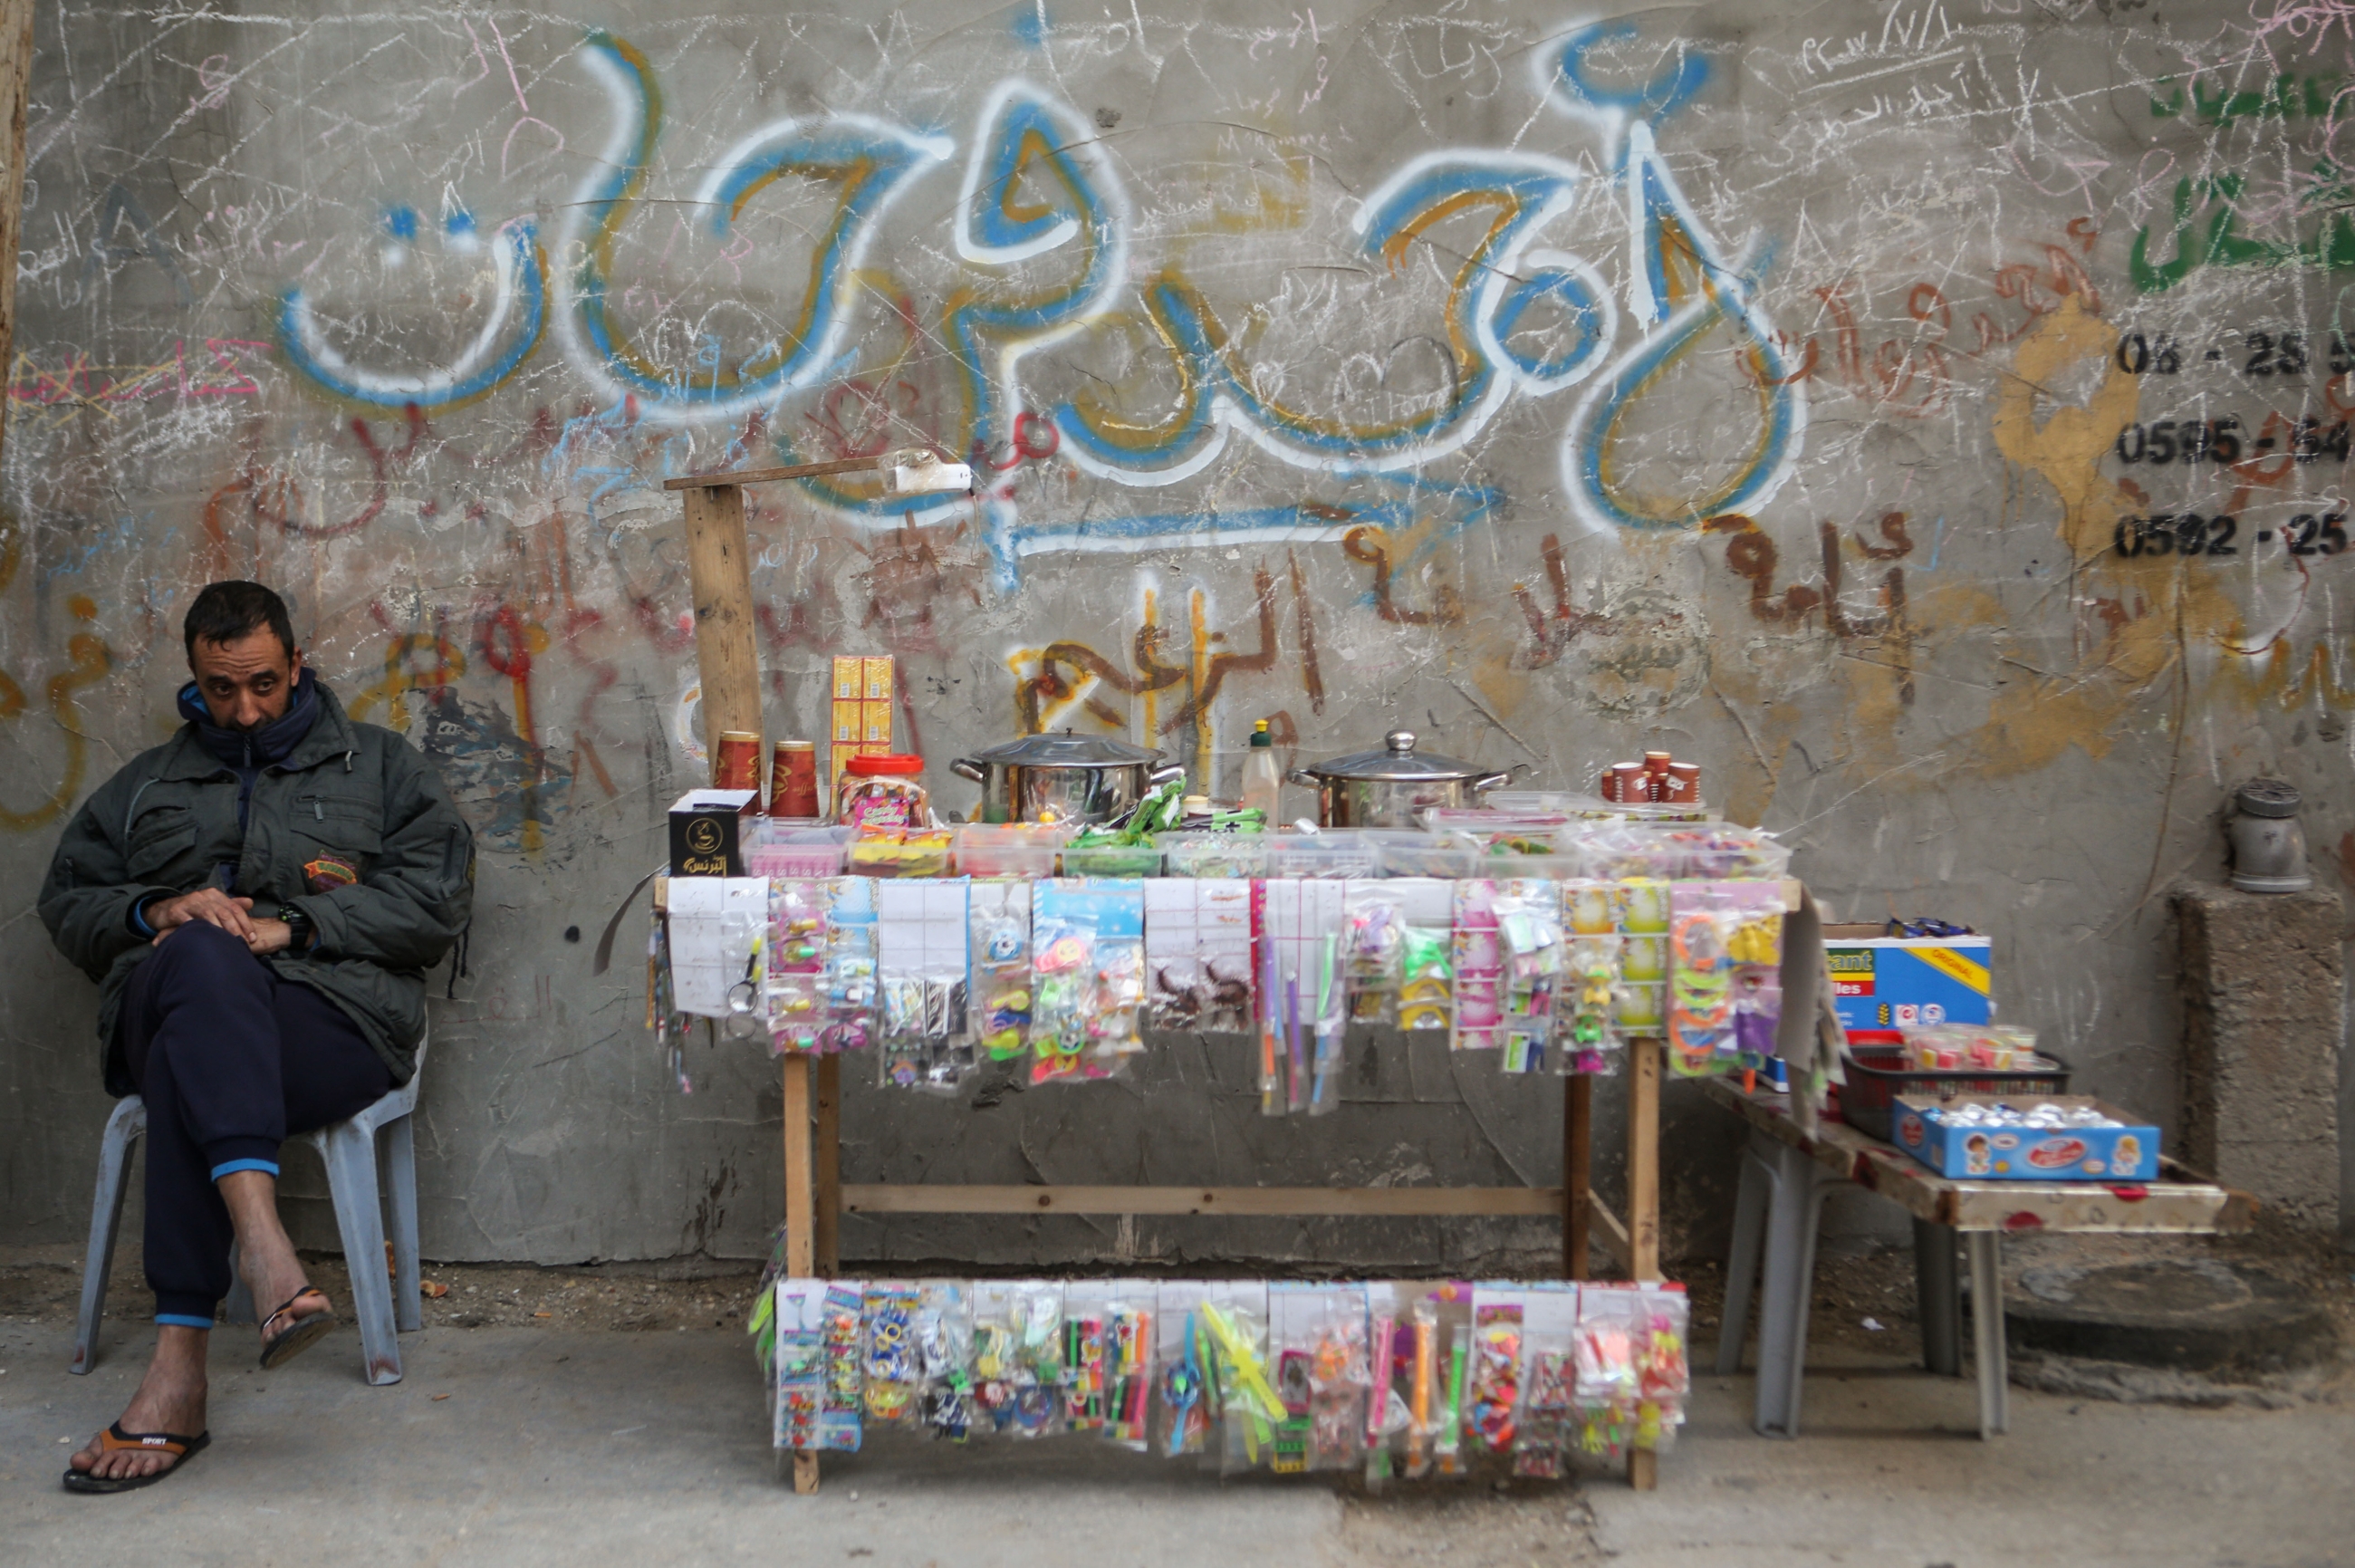 A Palestinian vendor sits by his sweets and children toys cart in al-Shati refugee camp west of Gaza on 2 January 2018 (MEE/Mohammed al-Hajjar)